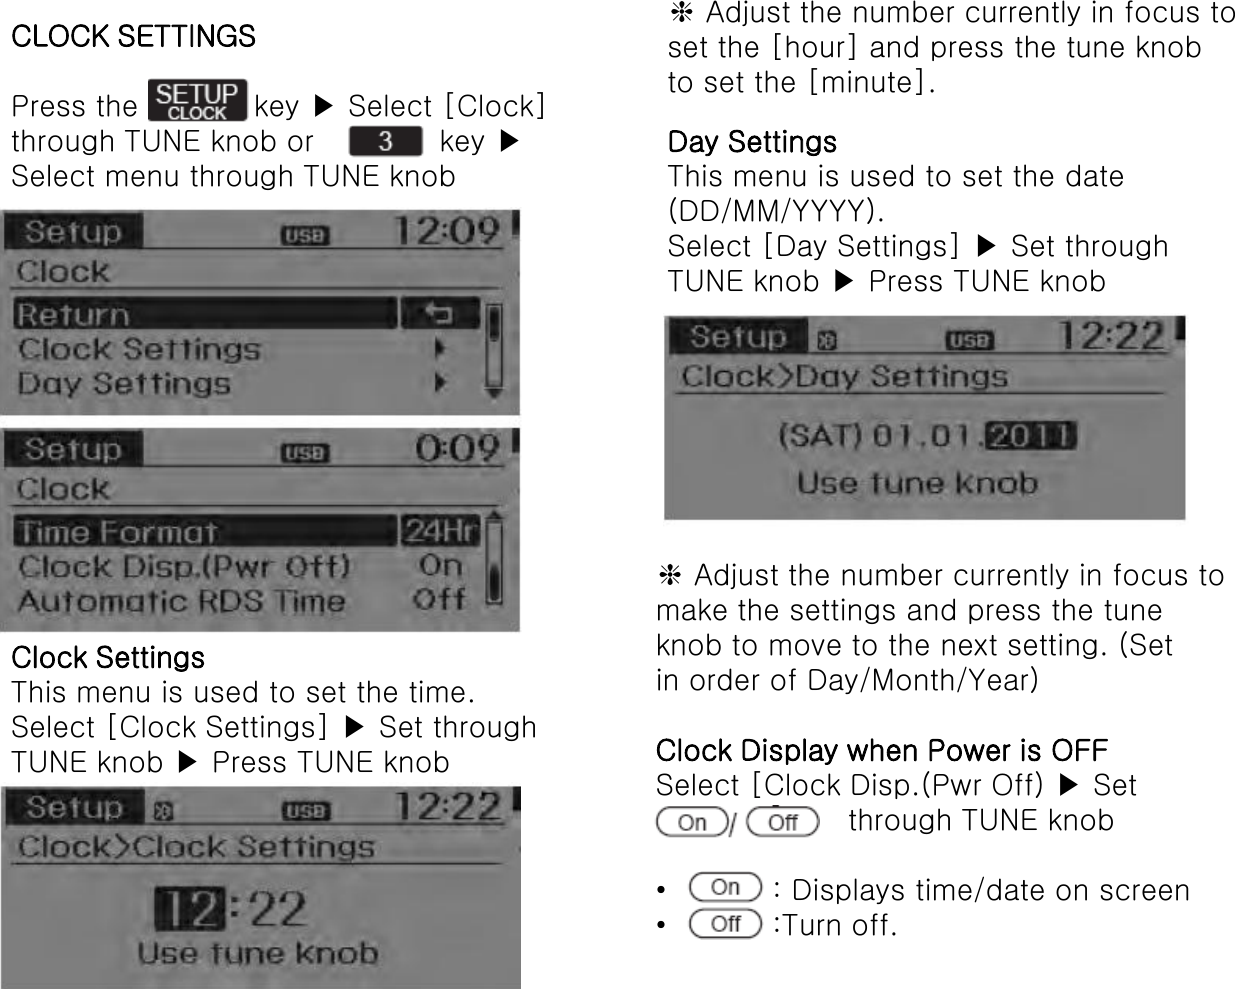 CLOCK SETTINGS  Press the            key ▶ Select [Clock] through TUNE knob or             key ▶ Select menu through TUNE knob Clock Settings This menu is used to set the time. Select [Clock Settings] ▶ Set through TUNE knob ▶ Press TUNE knob ❈ Adjust the number currently in focus to set the [hour] and press the tune knob to set the [minute]. Day Settings This menu is used to set the date (DD/MM/YYYY). Select [Day Settings] ▶ Set through TUNE knob ▶ Press TUNE knob ❈ Adjust the number currently in focus to make the settings and press the tune knob to move to the next setting. (Set in order of Day/Month/Year)  Clock Display when Power is OFF Select [Clock Disp.(Pwr Off) ▶ Set                     through TUNE knob  •           : Displays time/date on screen •           :Turn off. 